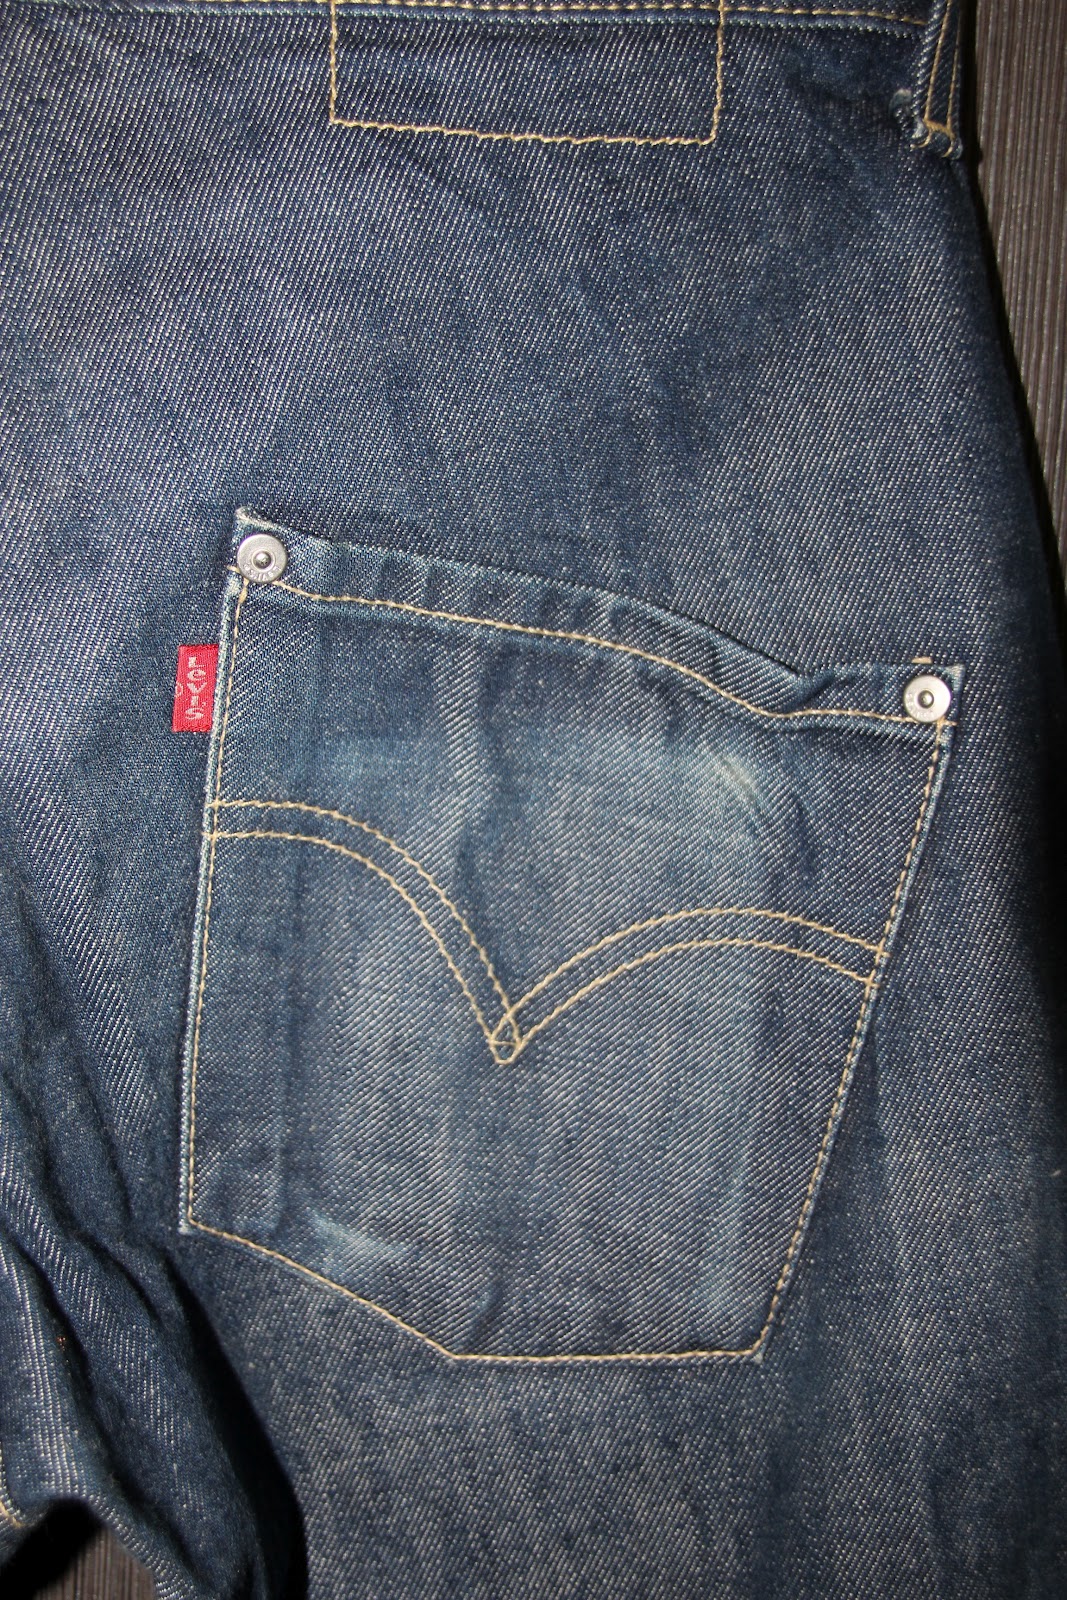 Hipster Closet: Levi's Engineered Jeans - RM150